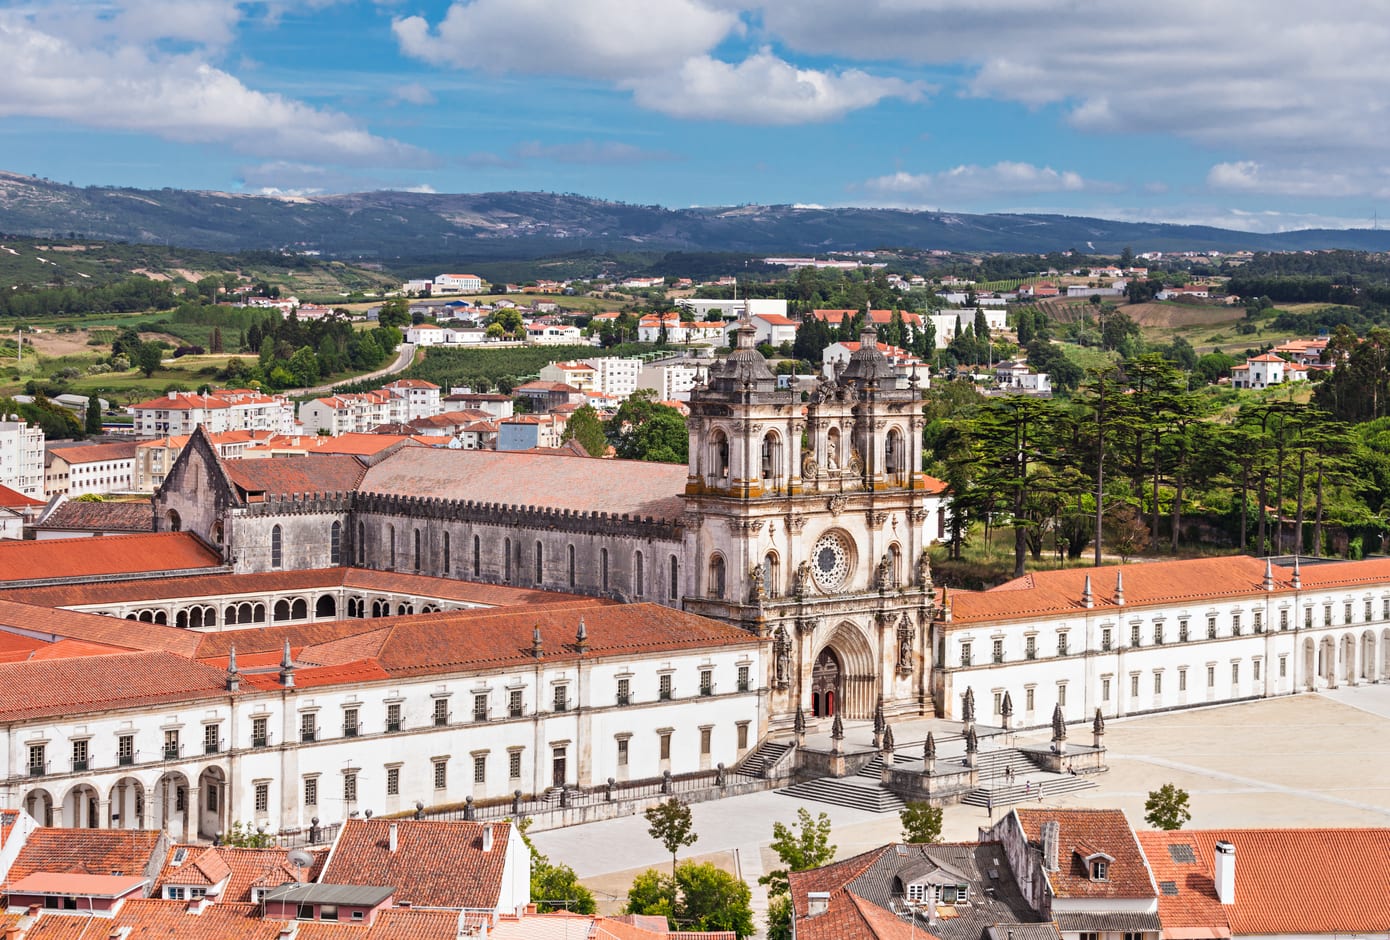 Aerial view of Alcobaça Monastery, in Portugal
